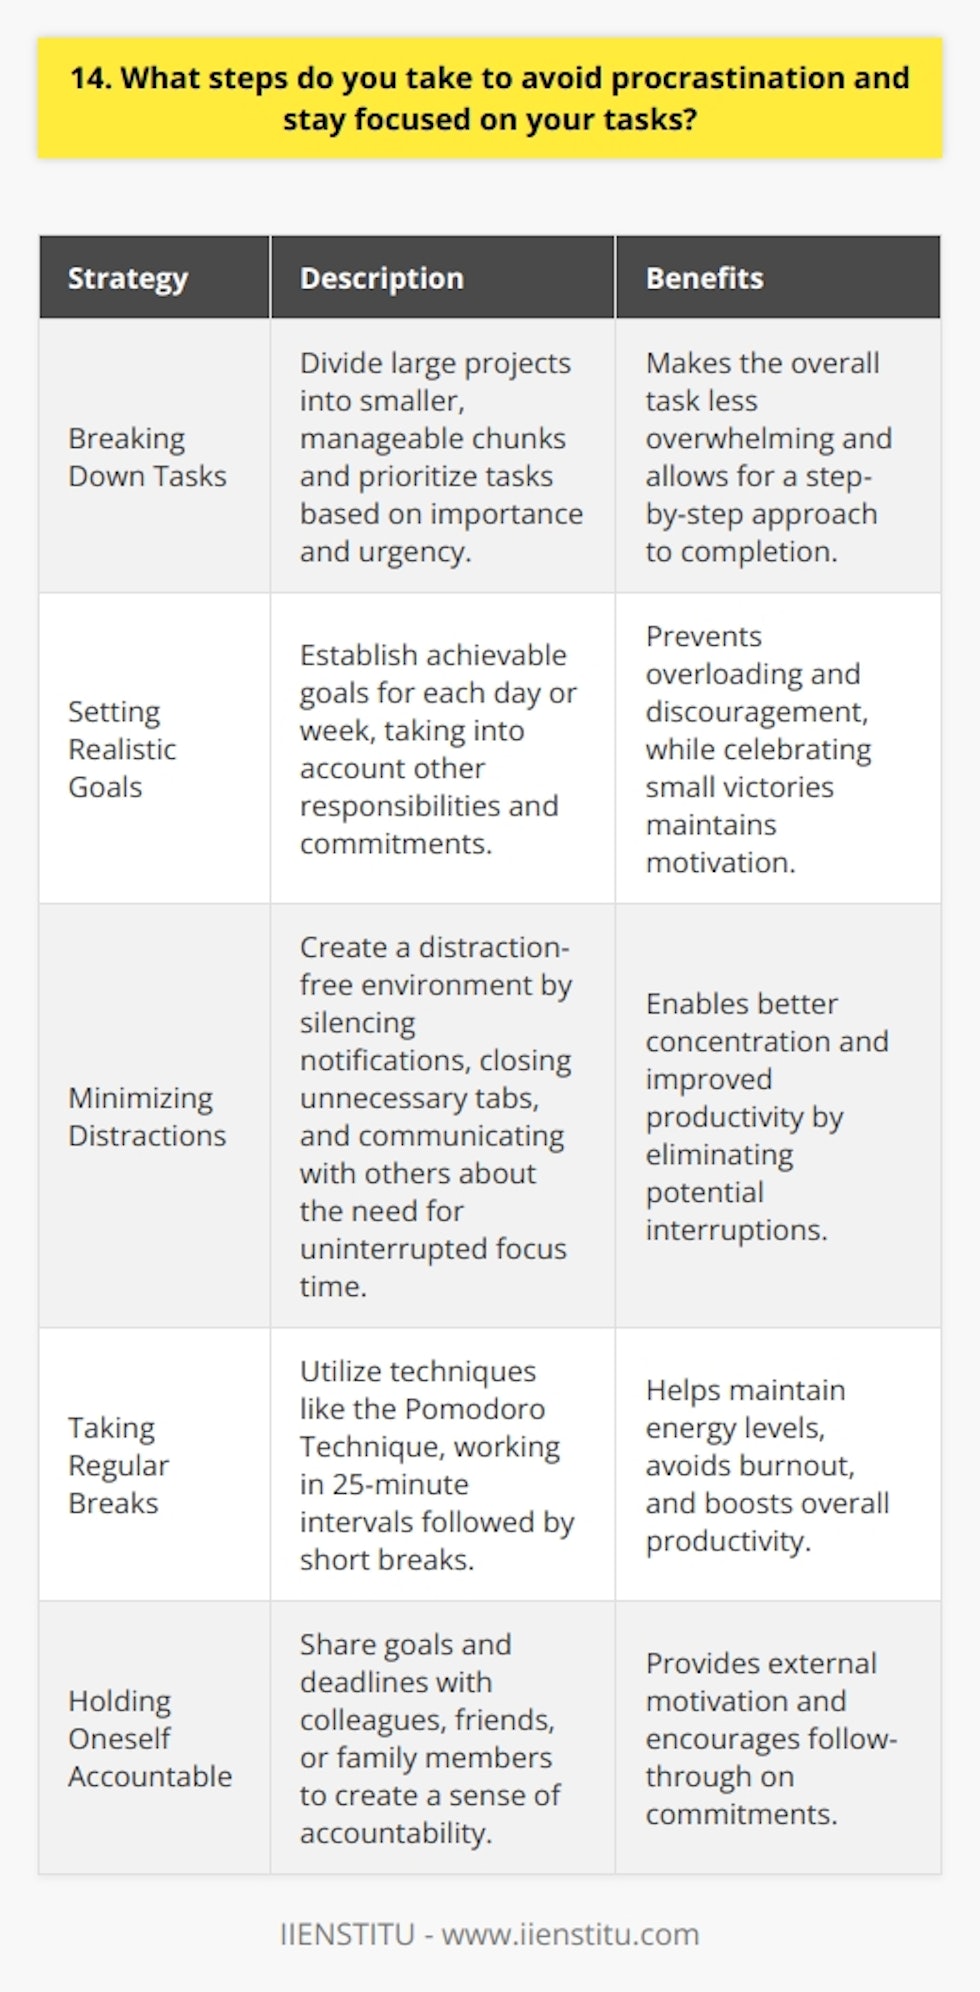 To avoid procrastination and stay focused on my tasks, I have developed a few effective strategies over the years. These techniques have helped me consistently meet deadlines and deliver high-quality work. Breaking Down Tasks When faced with a large project, I break it down into smaller, manageable chunks. This makes the overall task feel less overwhelming and allows me to tackle it one step at a time. I create a detailed to-do list and prioritize the most important or time-sensitive items. Setting Realistic Goals I set realistic goals for each day or week, considering my other responsibilities and commitments. This helps me avoid overloading myself and feeling discouraged. I also celebrate small victories along the way, which keeps me motivated. Minimizing Distractions To maintain focus, I create a distraction-free environment. I silence my phone notifications and close unnecessary tabs on my computer. If Im working from home, I let my family know that I need uninterrupted time to concentrate. Taking Regular Breaks While it may seem counterintuitive, taking regular breaks actually boosts my productivity. I use the Pomodoro Technique, working in 25-minute intervals followed by short breaks. This helps me maintain energy and avoid burnout. Holding Myself Accountable I hold myself accountable by sharing my goals and deadlines with others. This could be a colleague, friend, or family member. Knowing that someone else is aware of my commitments keeps me on track and motivated to follow through. By implementing these strategies consistently, I have been able to overcome procrastination and maintain a high level of focus and productivity in my work.